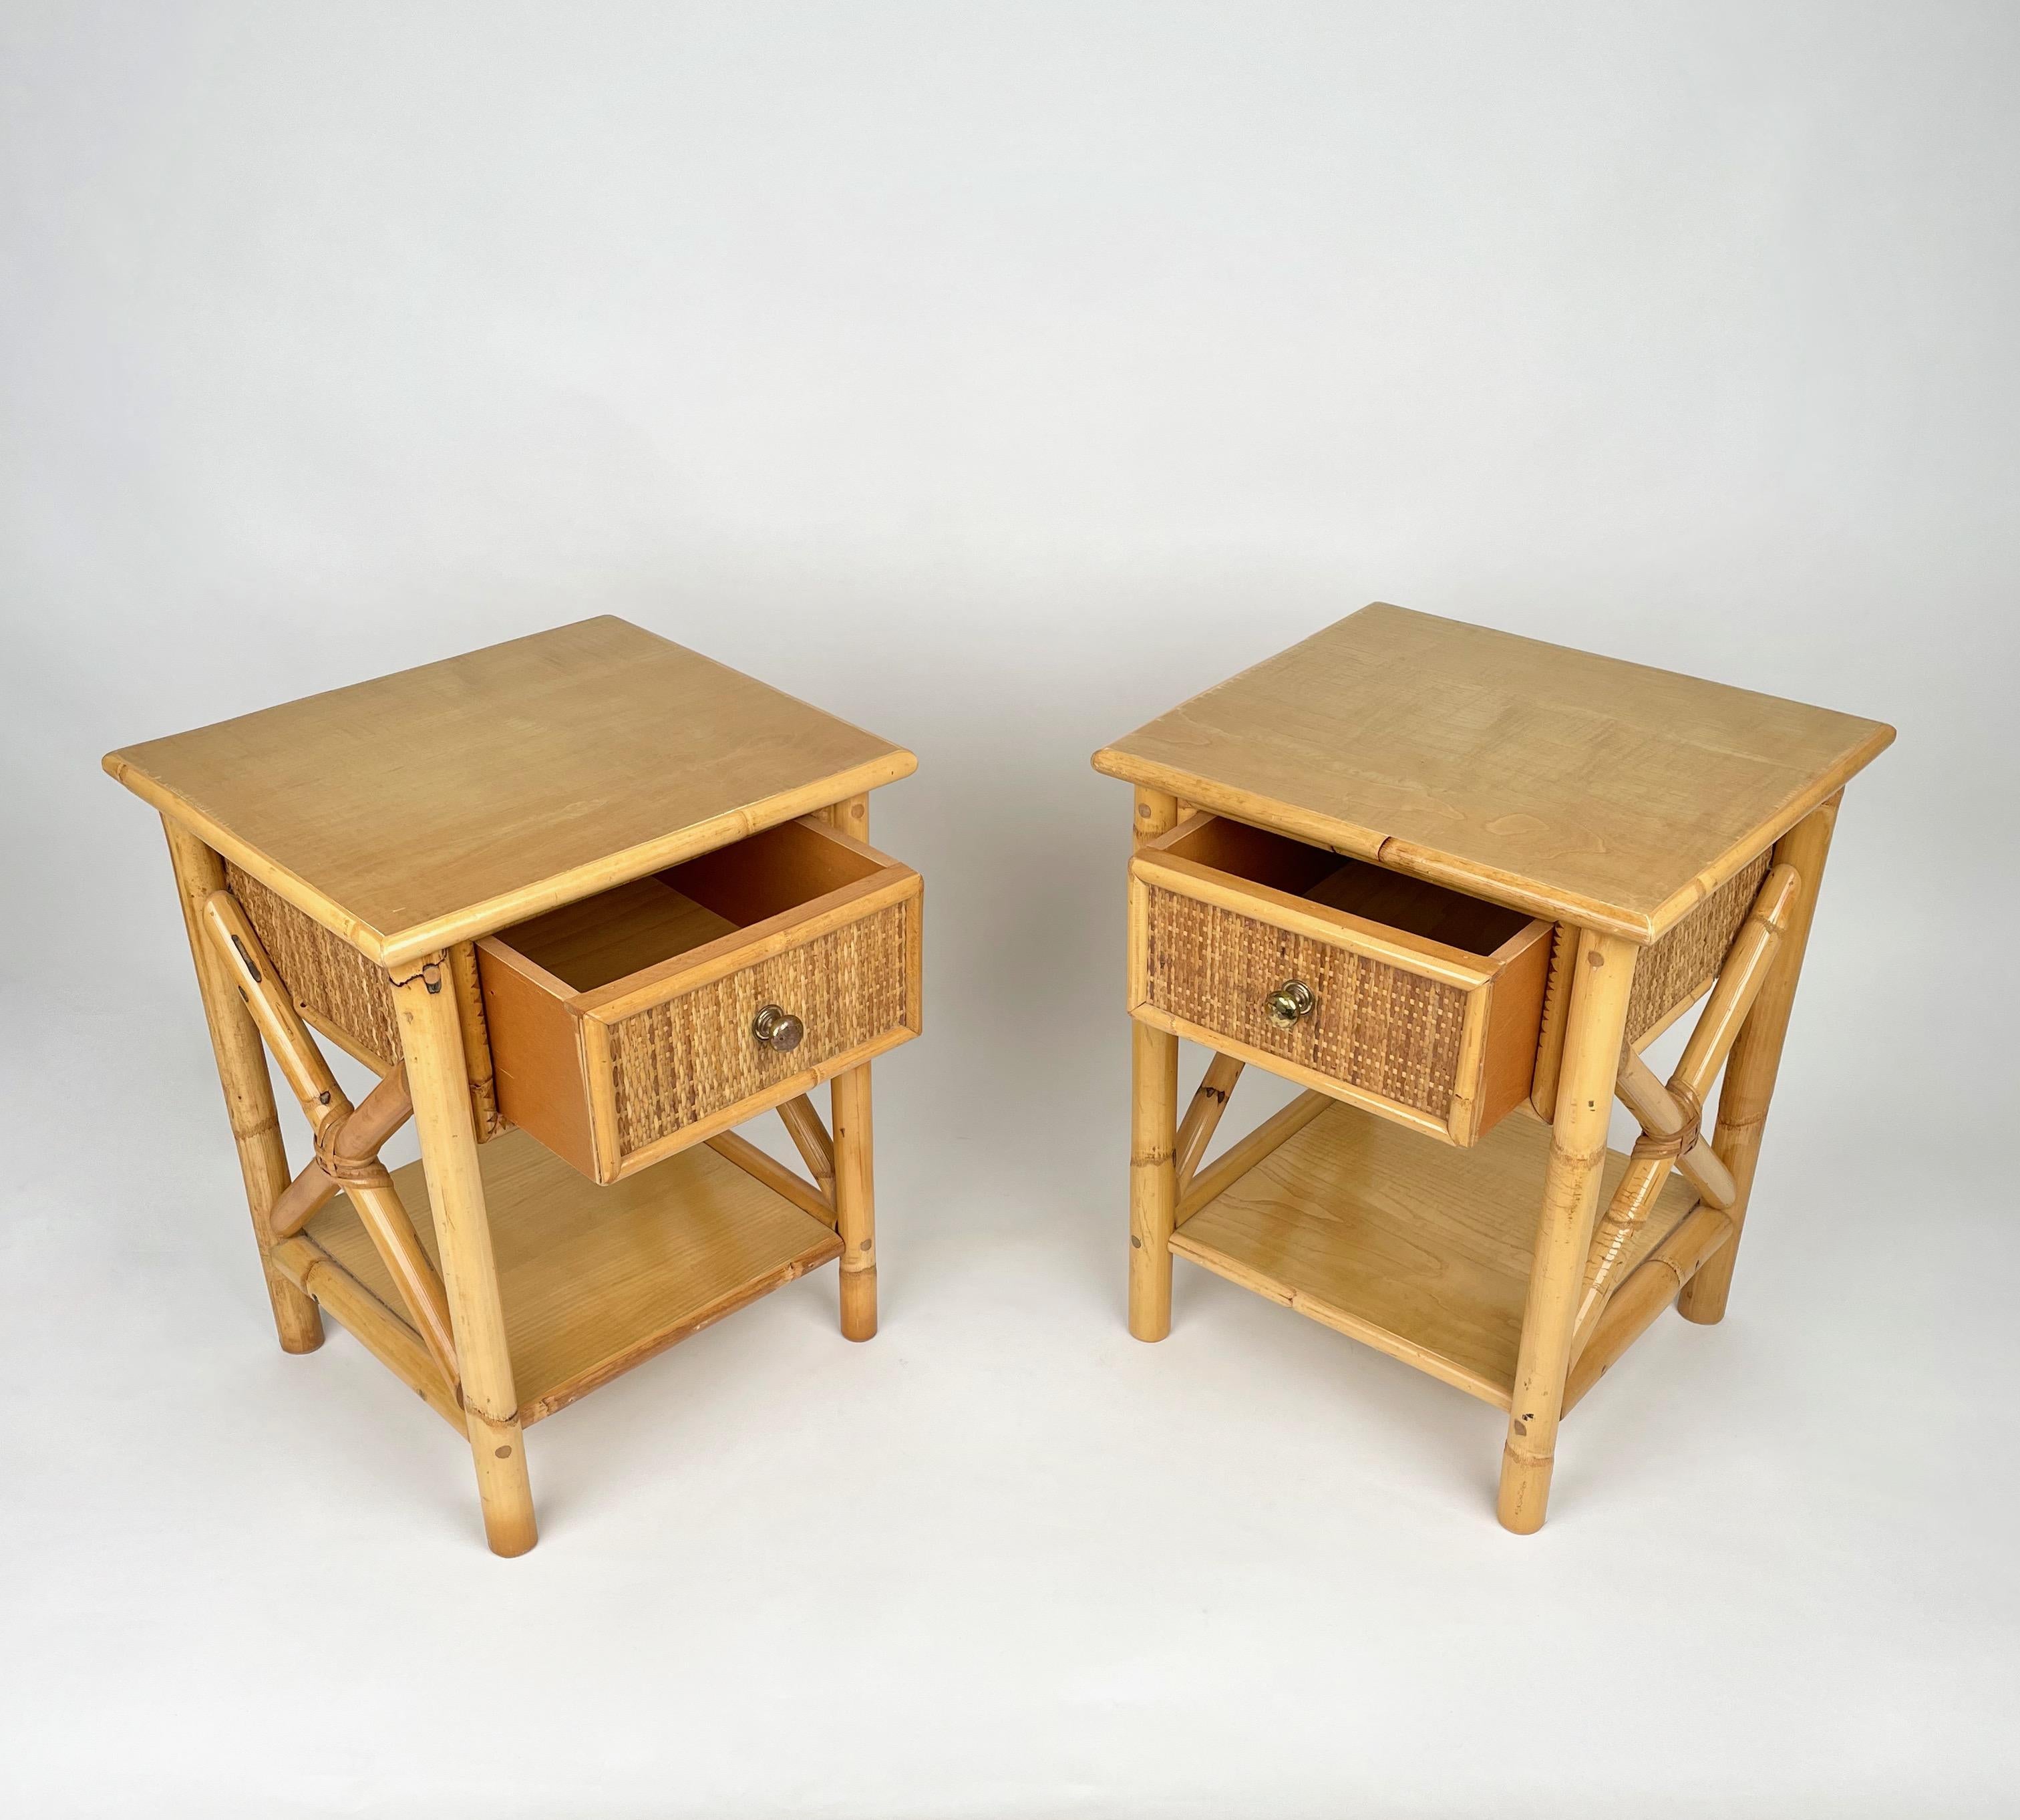 Late 20th Century Pair of Bed Side Tables in Bamboo, Rattan & Wood, Italy 1980s For Sale